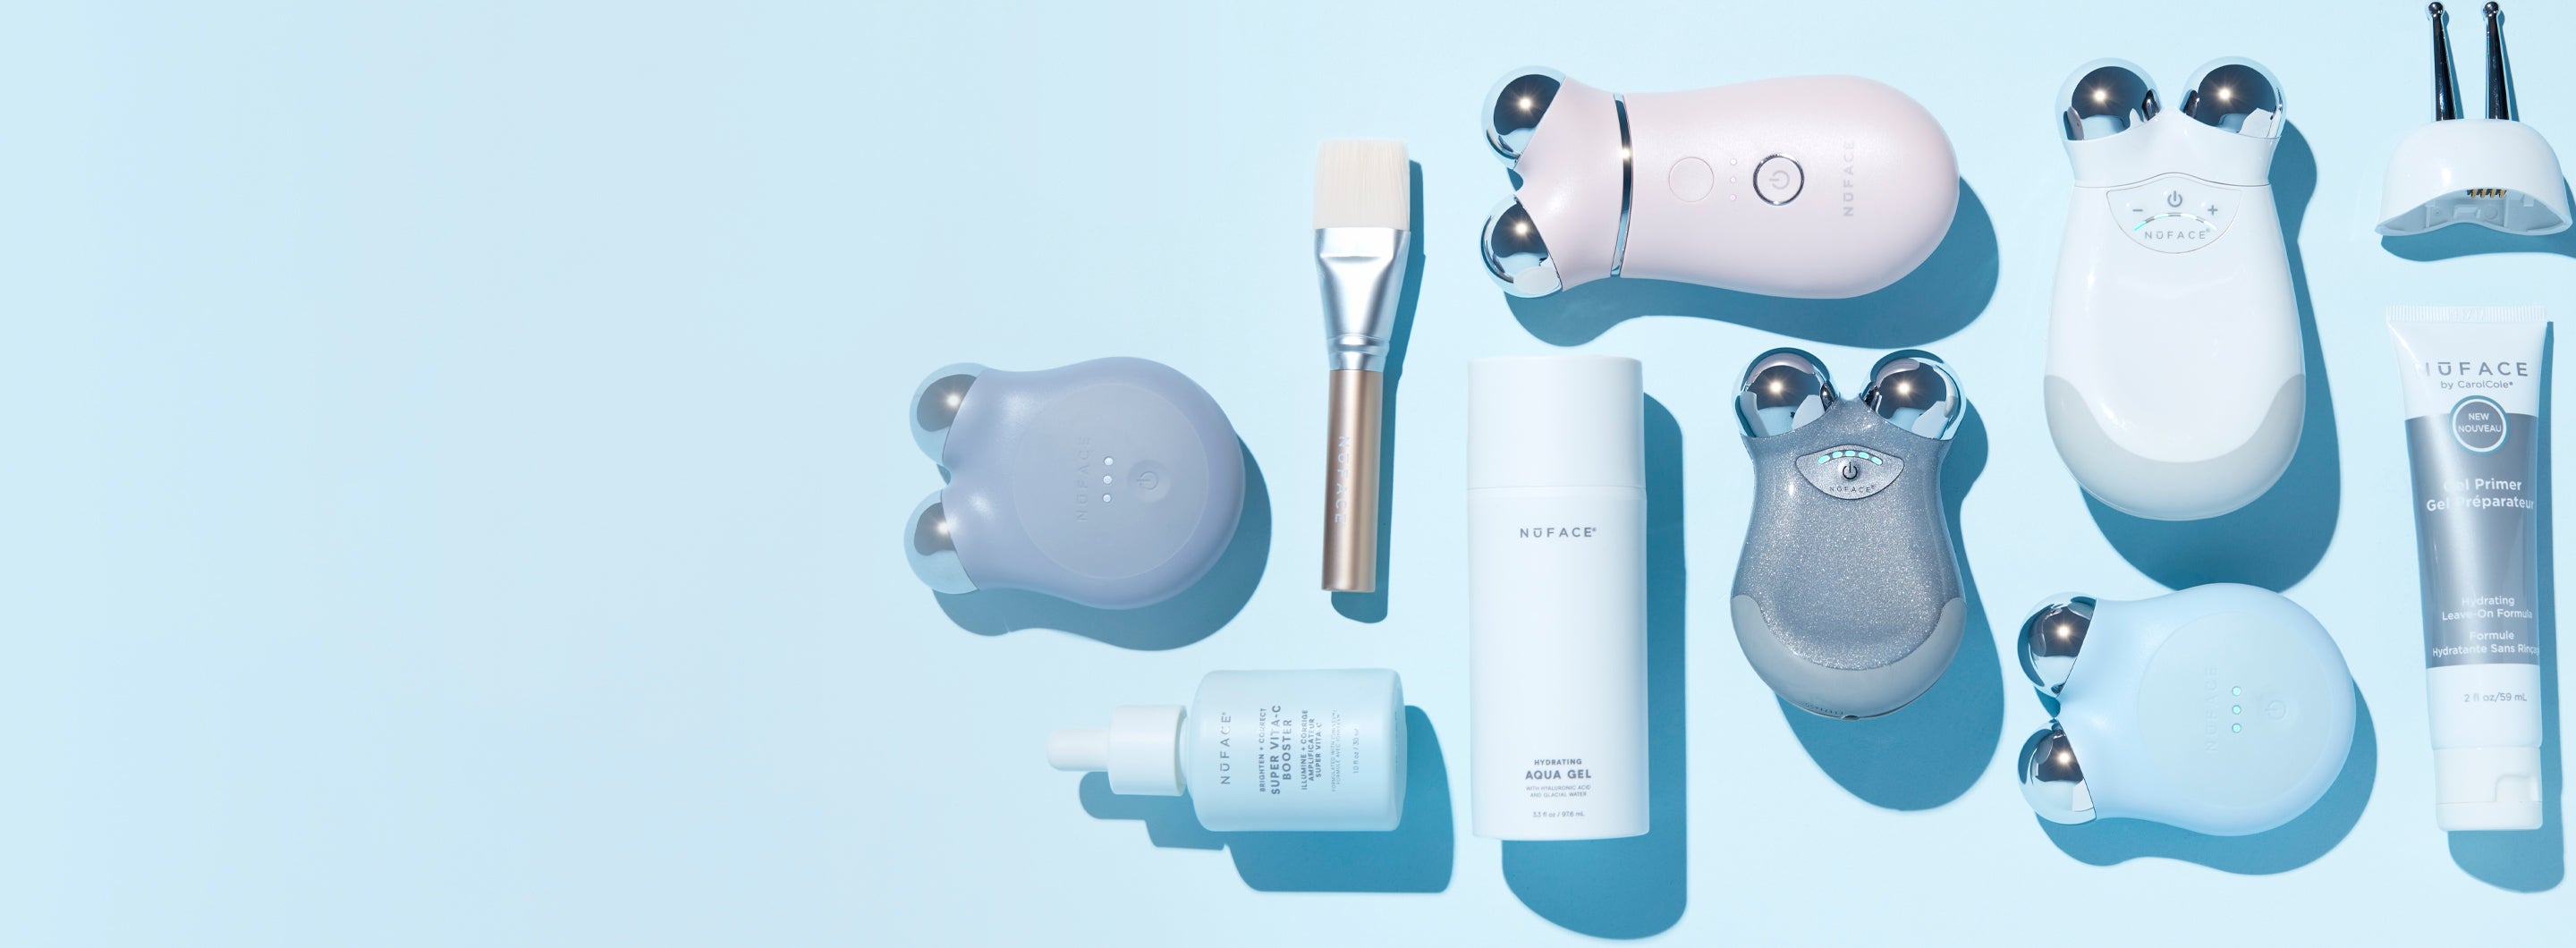 NuFACE Microcurrent Facial Toning Devices & Skincare Sets